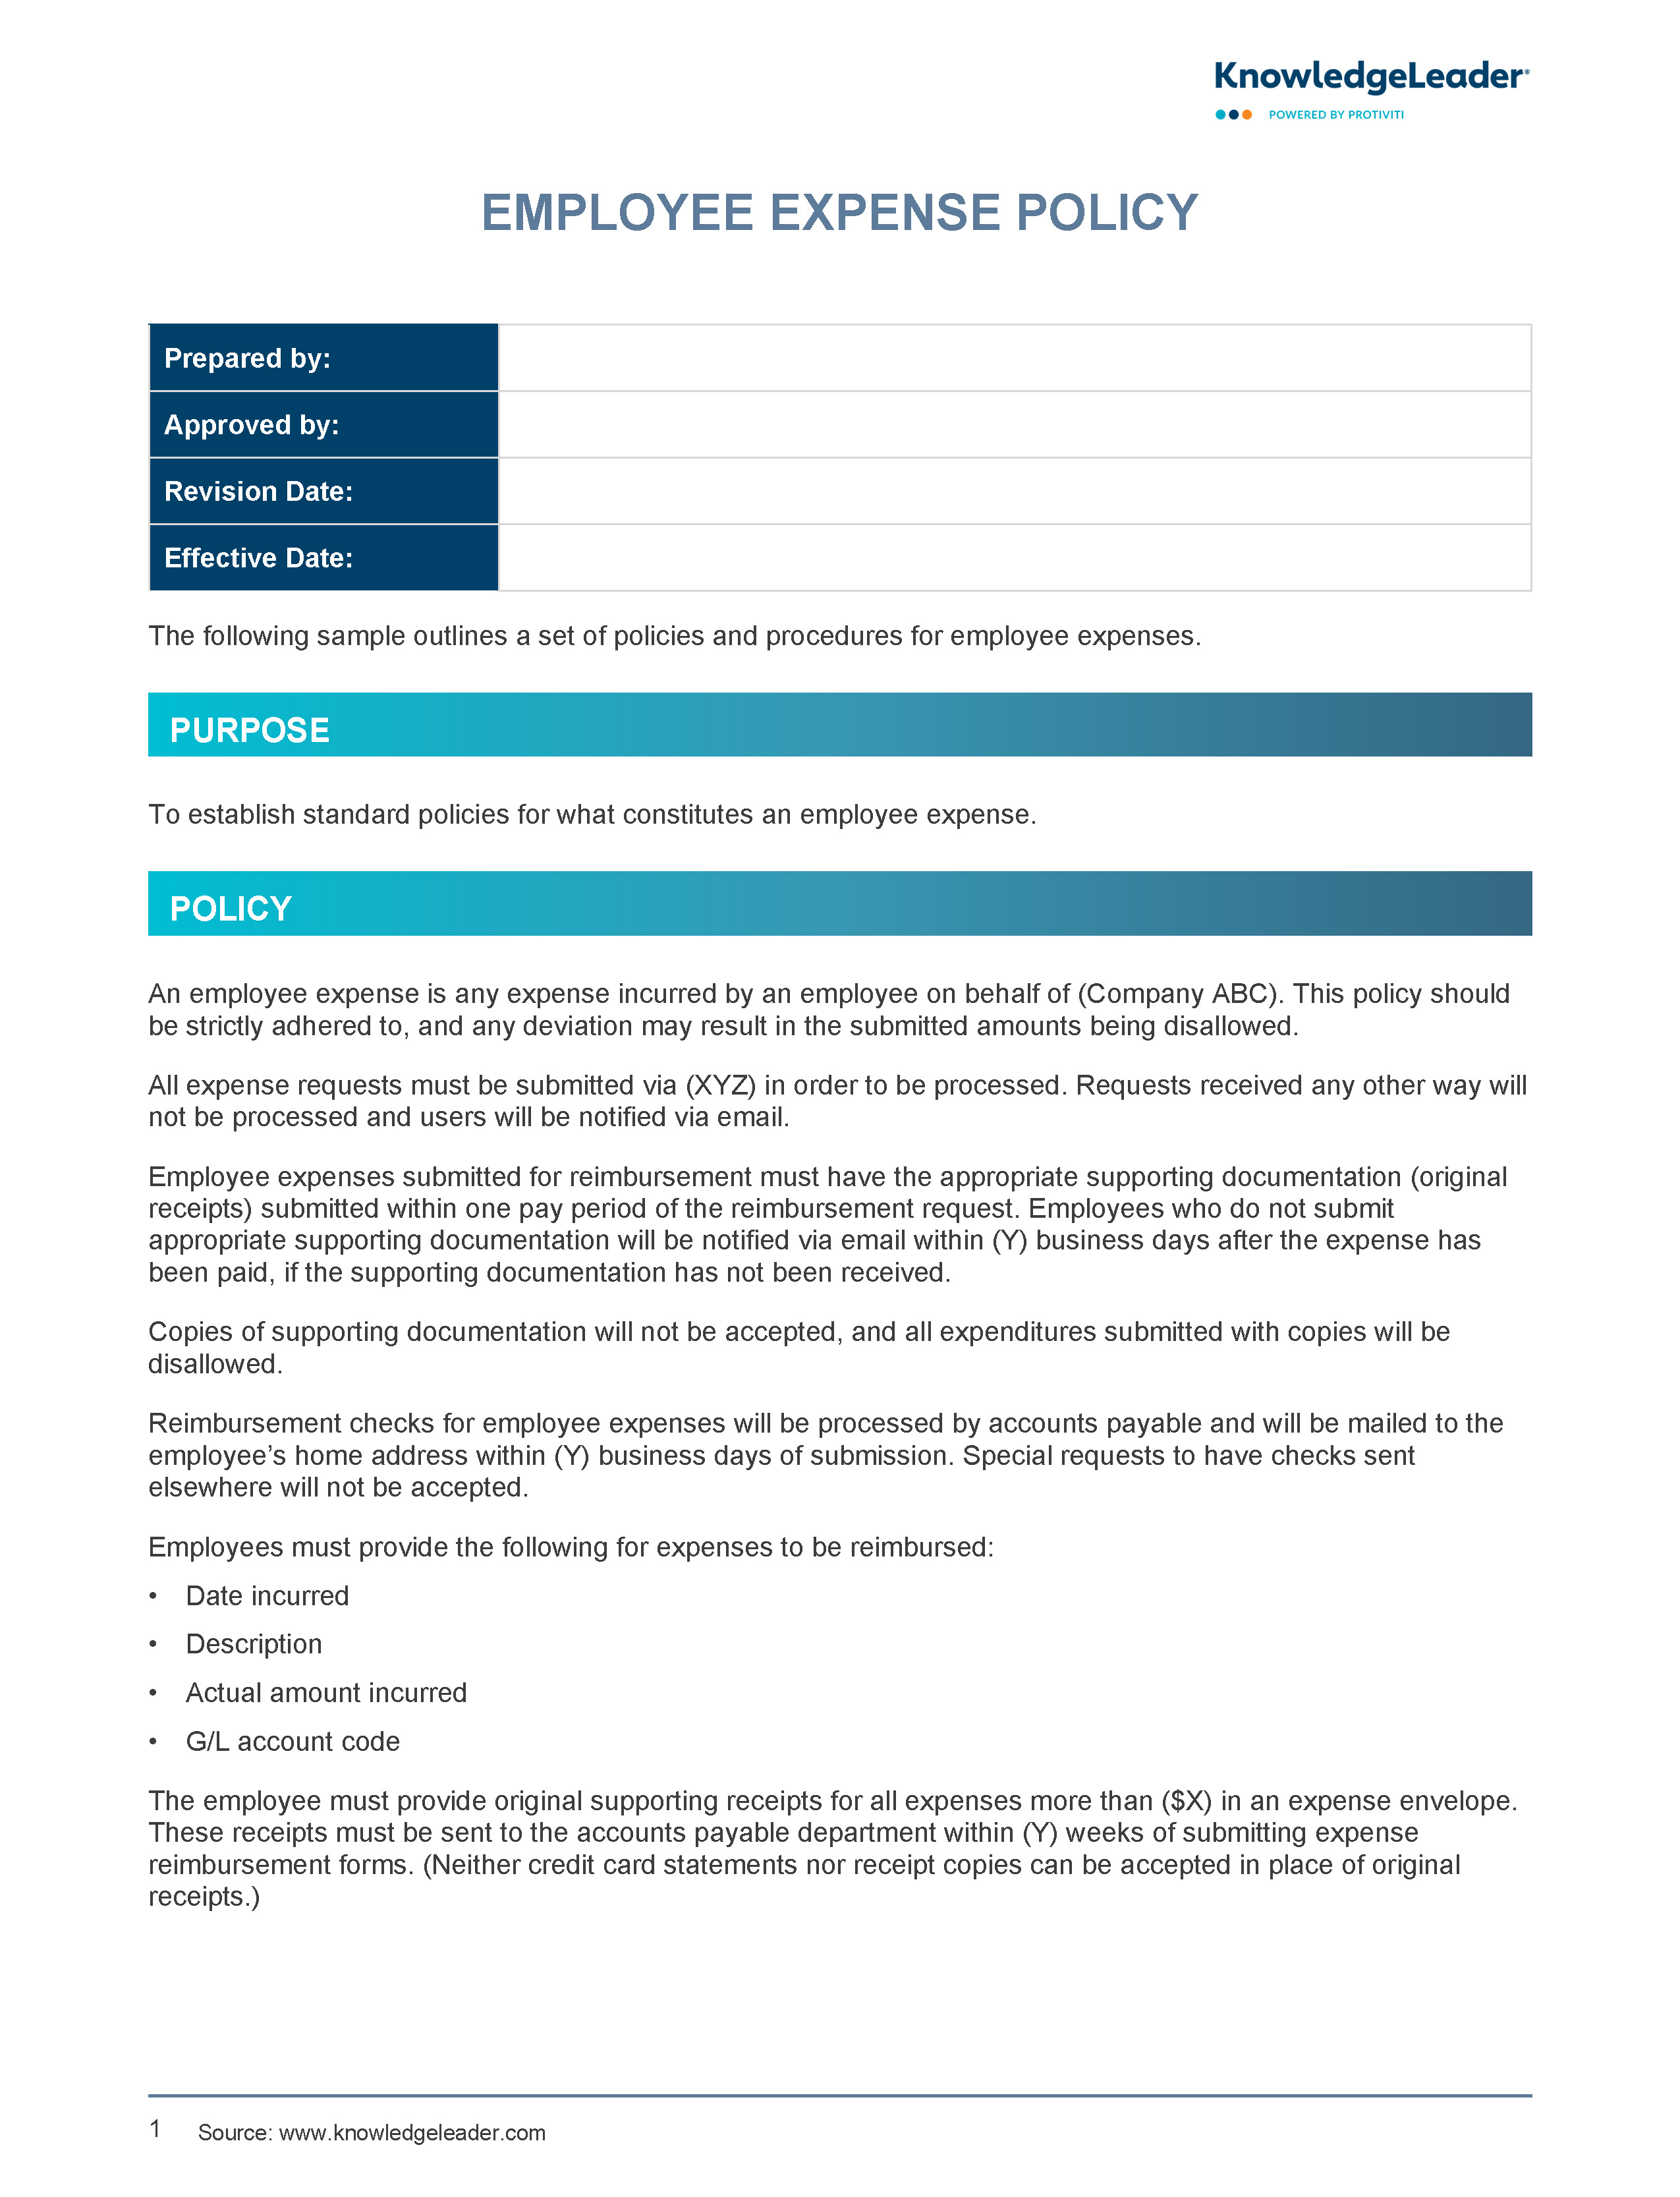 Screenshot of the first page of Employee Expense Policy